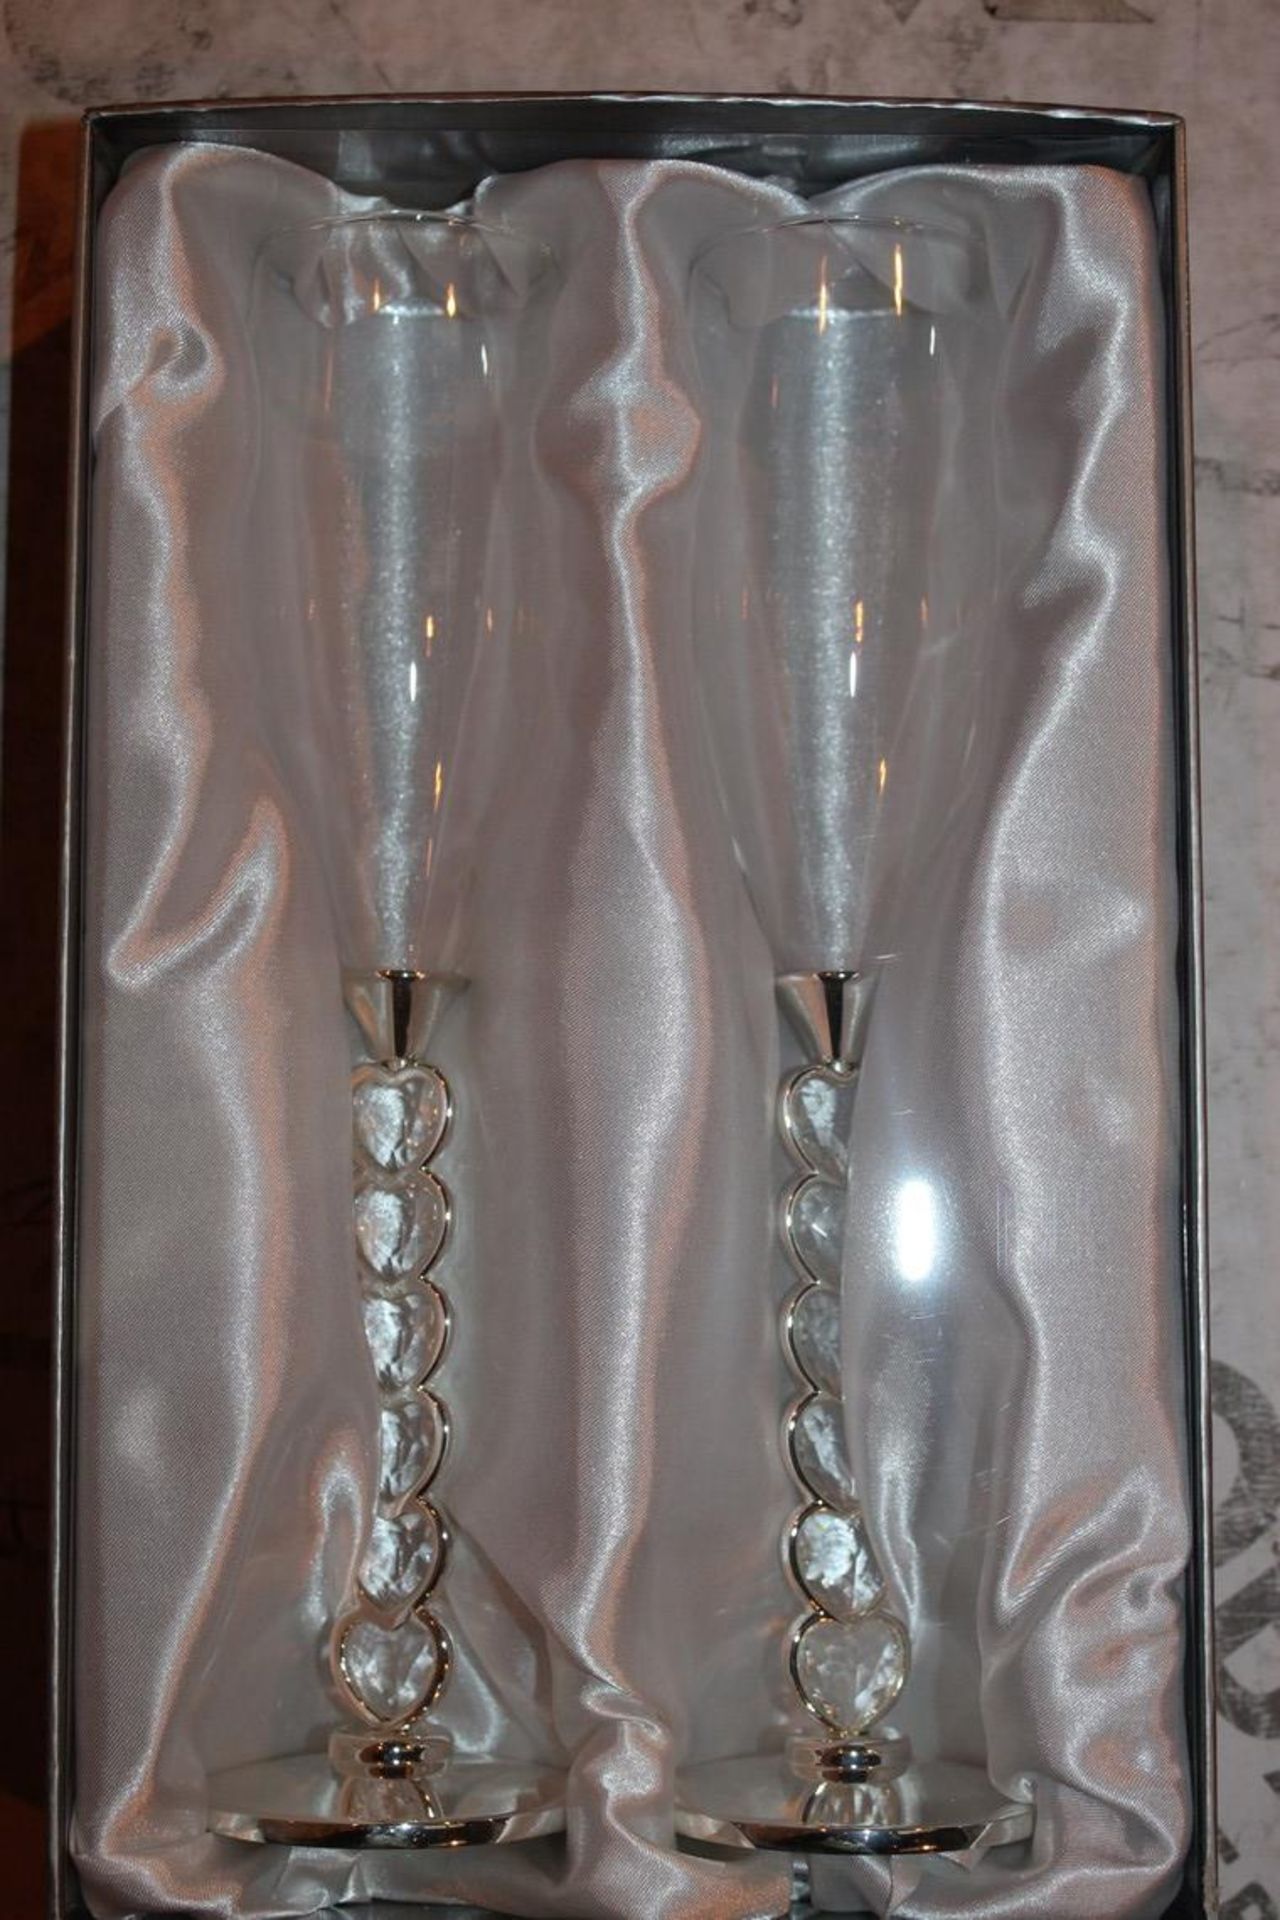 Lot to Contain 4 Brand New Sets of 2 The Wedding To Love And To Honour Toasting Flute Sets